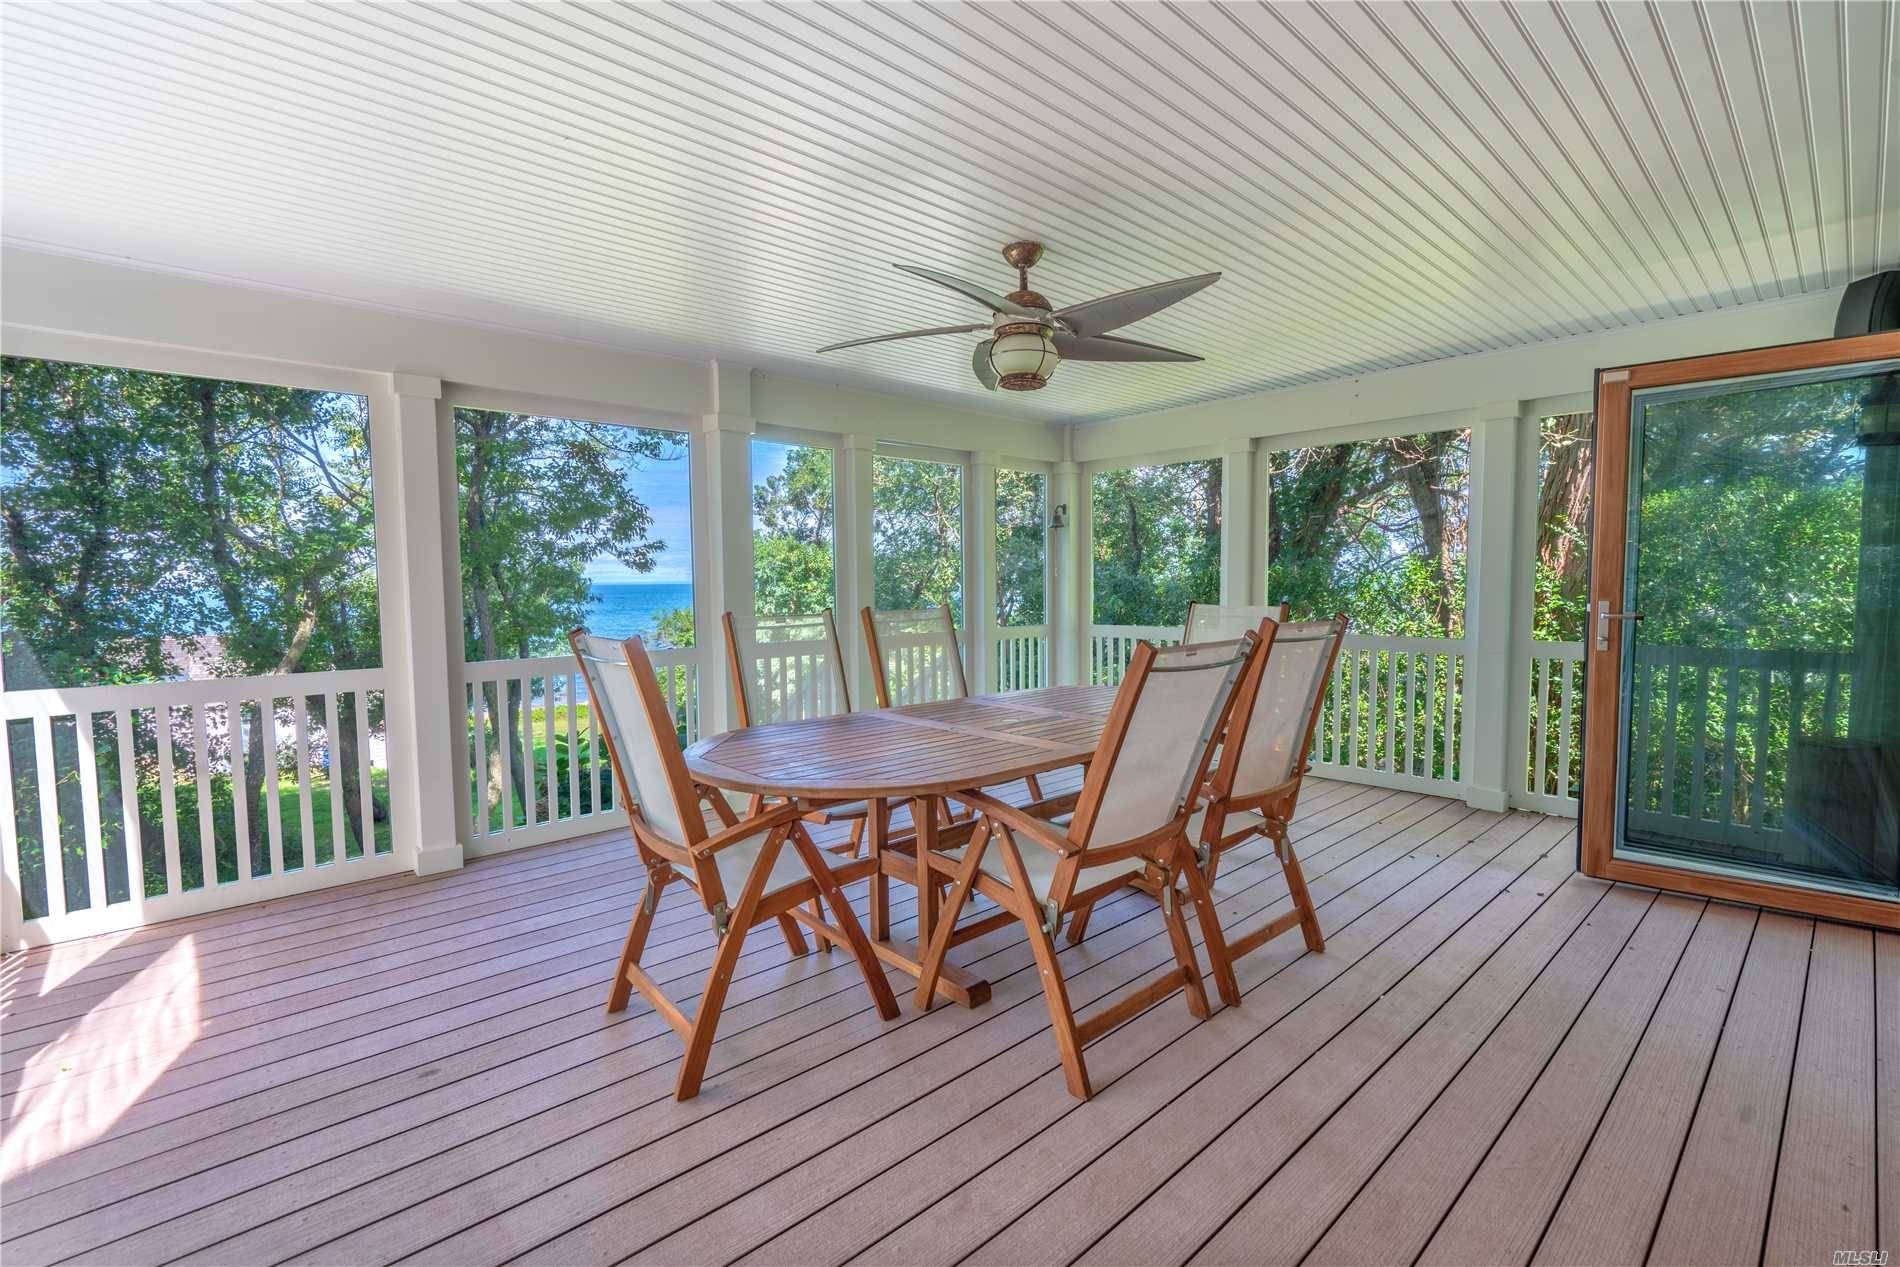 This Custom Built Home Offers Scenic Views Of The Long Island Sound Is Steps From A Sandy And Private Deeded Beach.